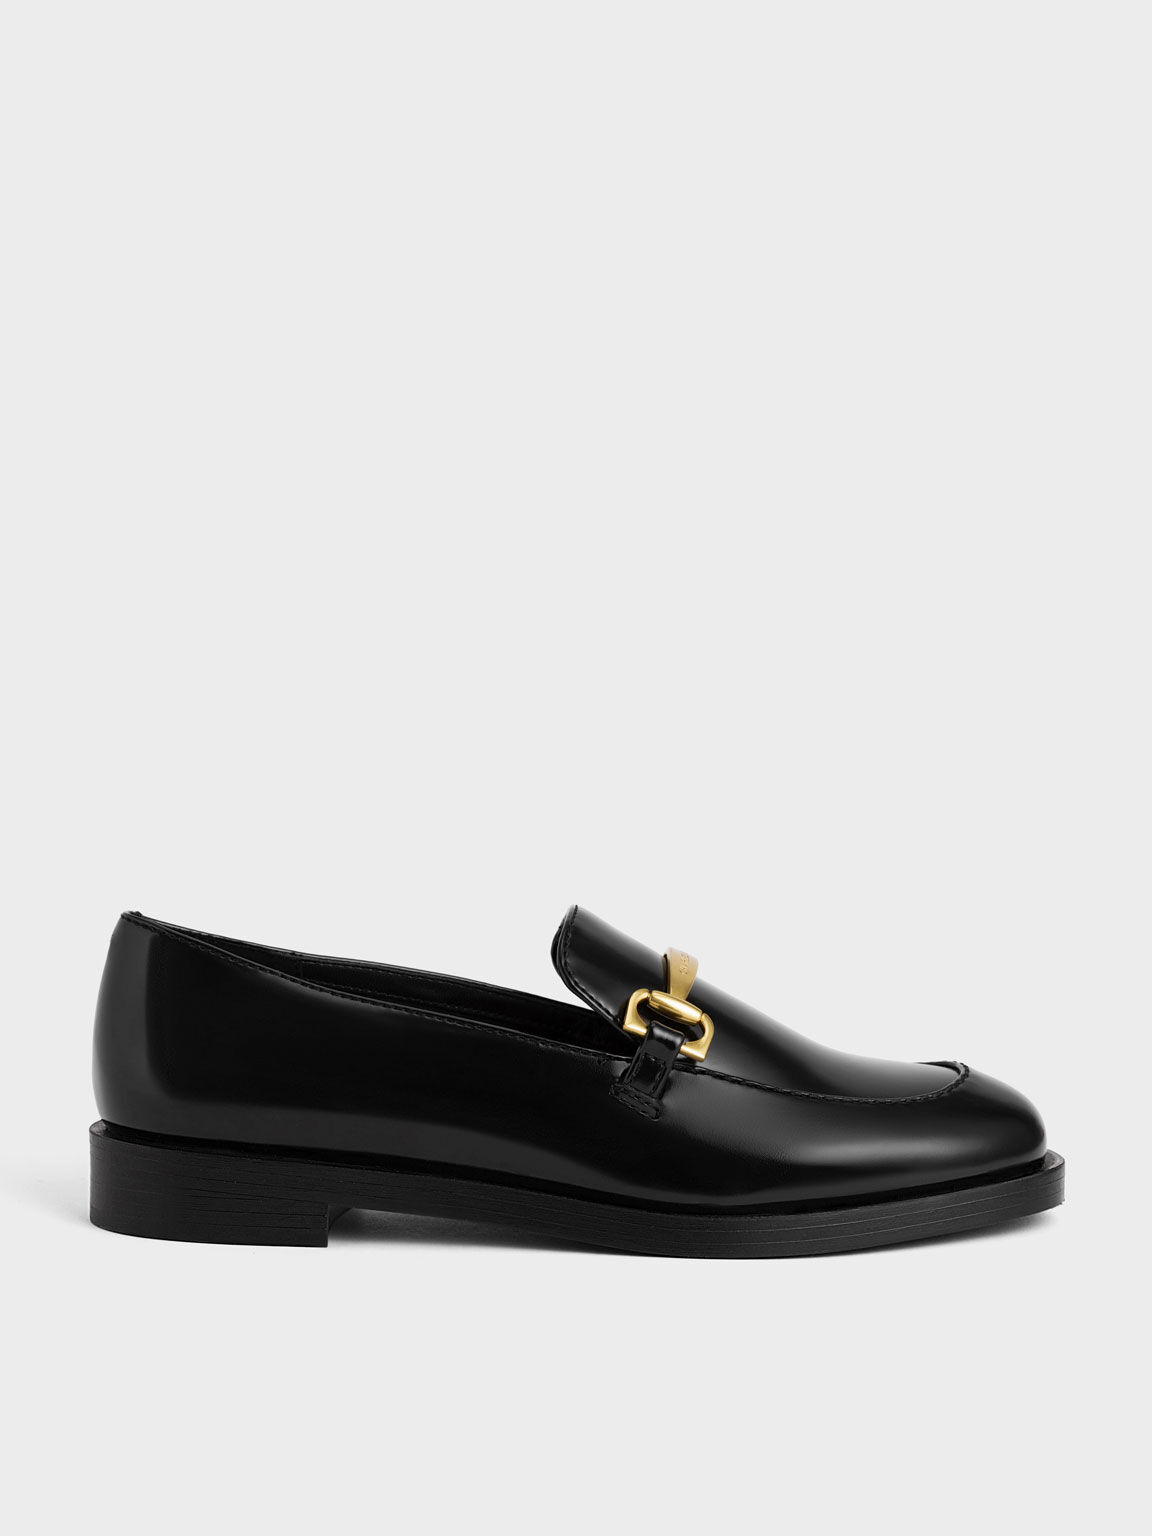 Metallic Accent Loafers - Black